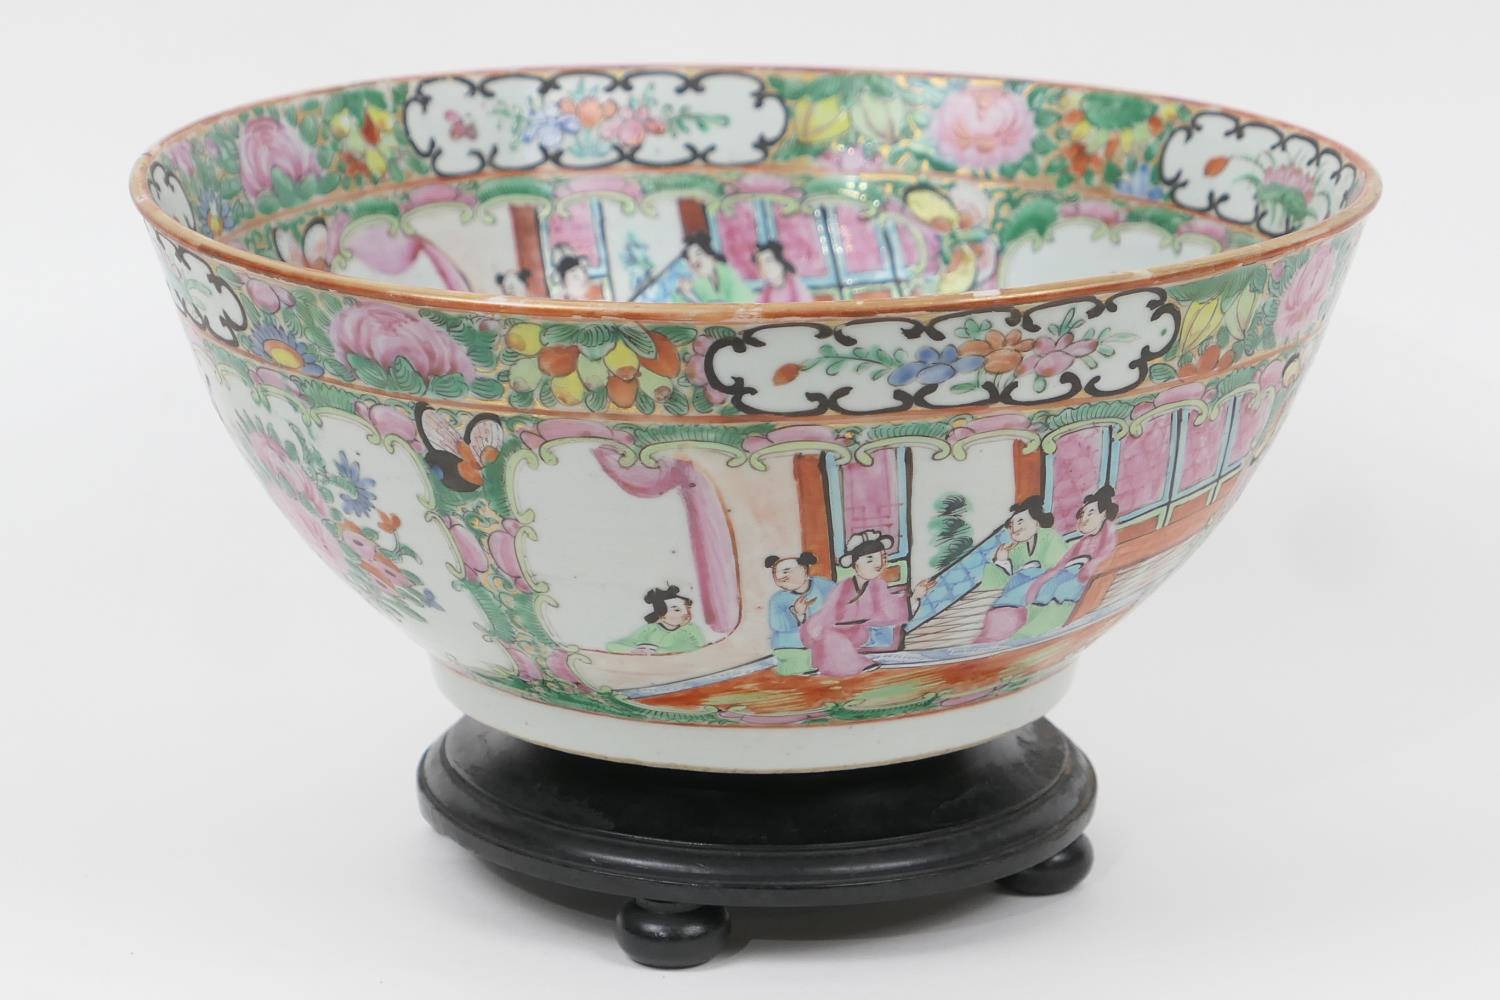 Cantonese famille rose bowl, late 19th/early 20th Century, typically decorated in famille rose